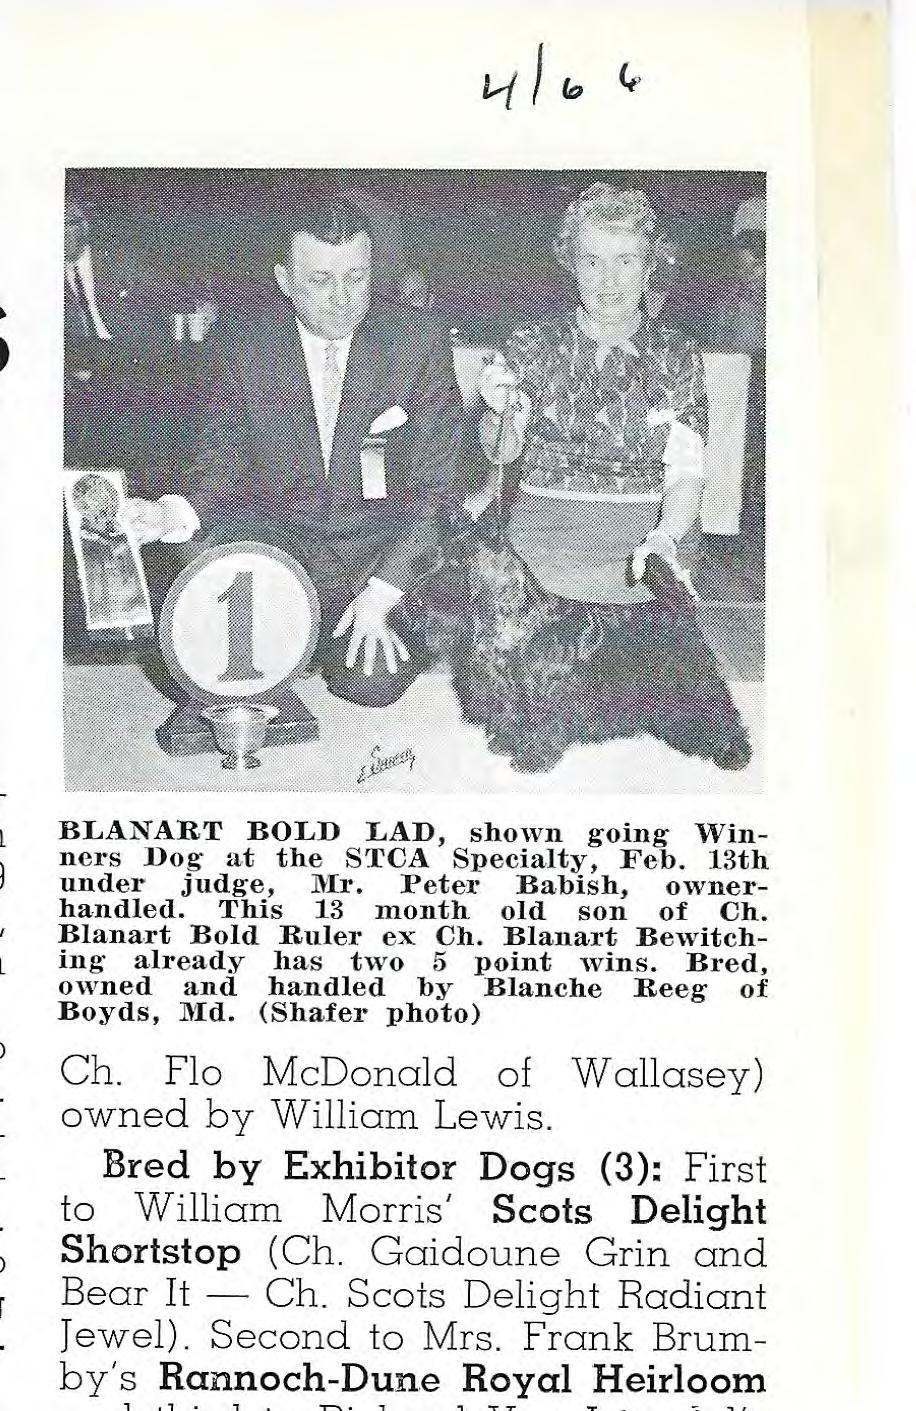 Raab Hill Rollingstone - 48 SCOTTISH TERRIER CLUB OF CALIFORNIA SPECIALTY June 25-26, 1966 With Kennel Club of Beve rly Hills For Information Contact Club Secretary MISS MEDORA MESSENGER 10045